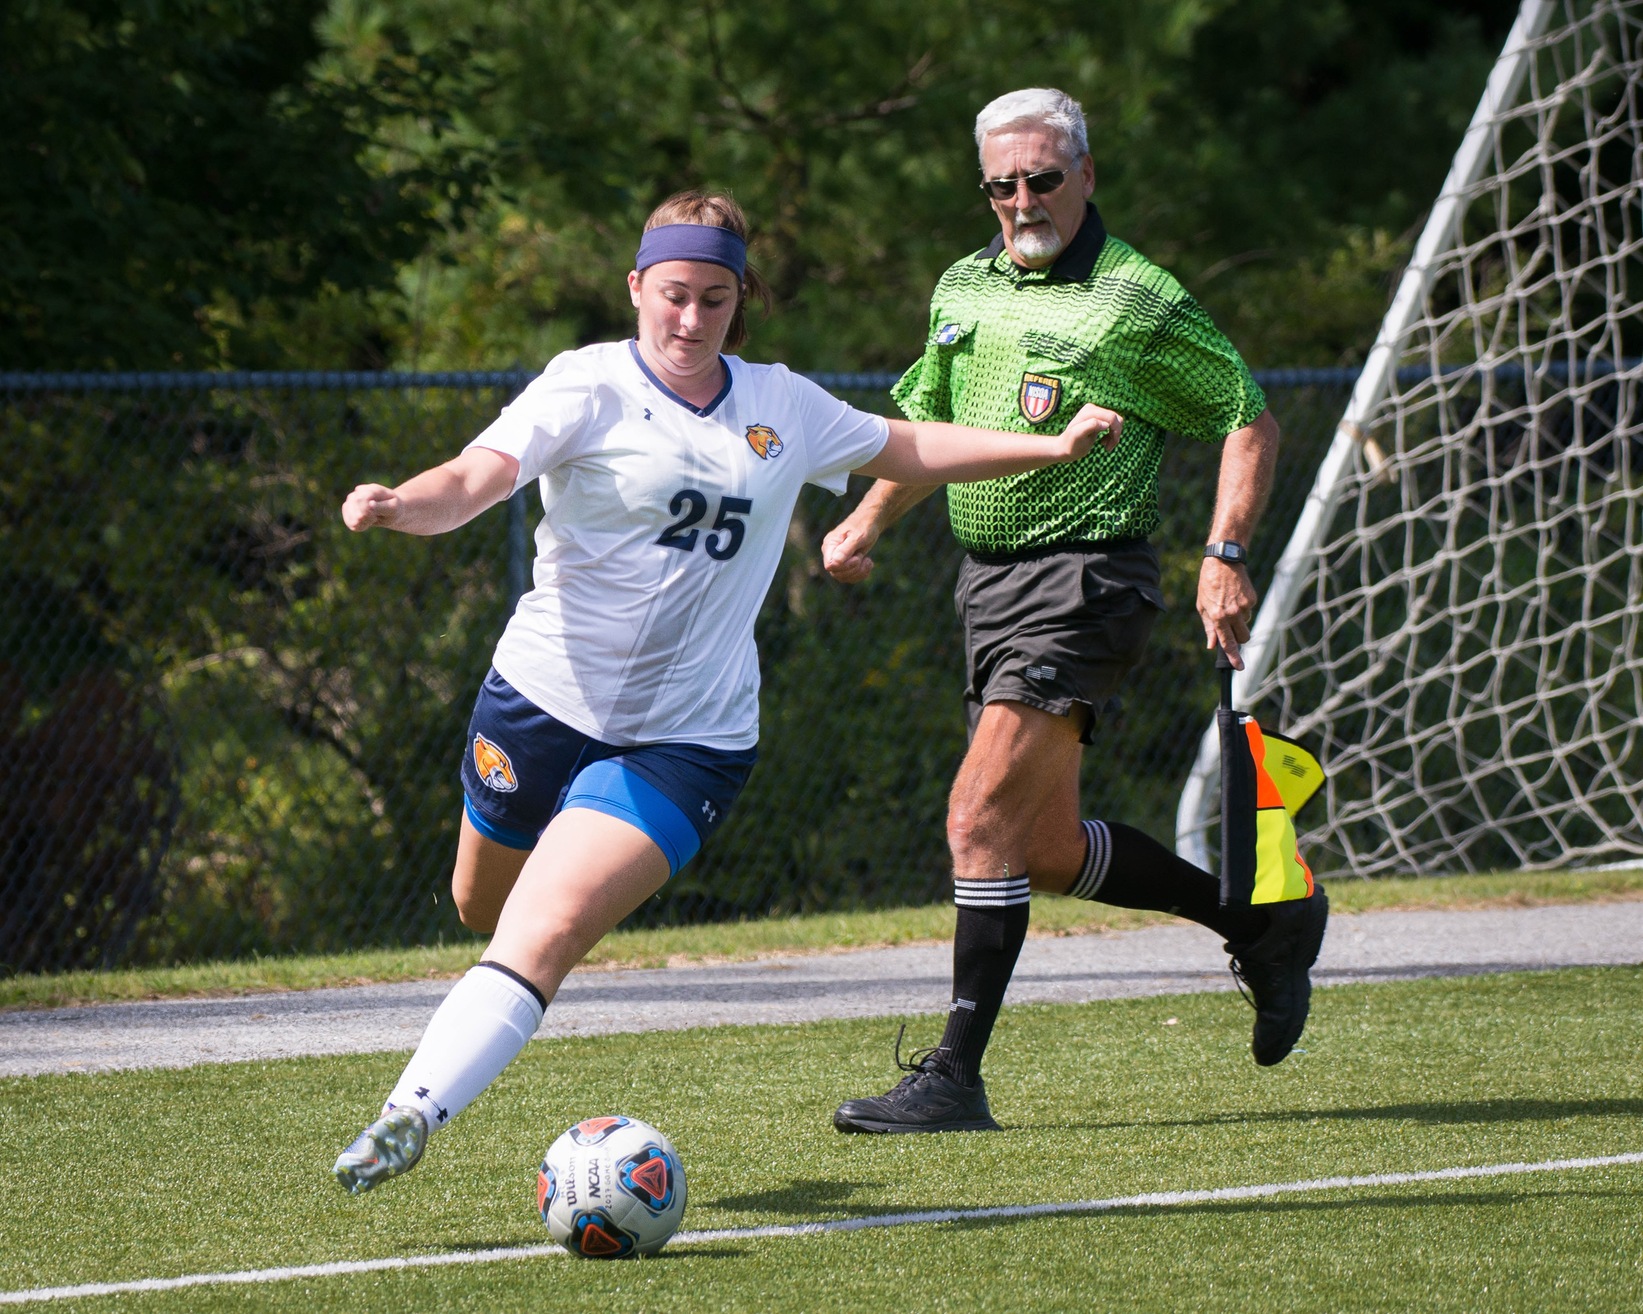 Holliday's goal leads women's soccer to third straight win with 2-0 win over Fitchburg State